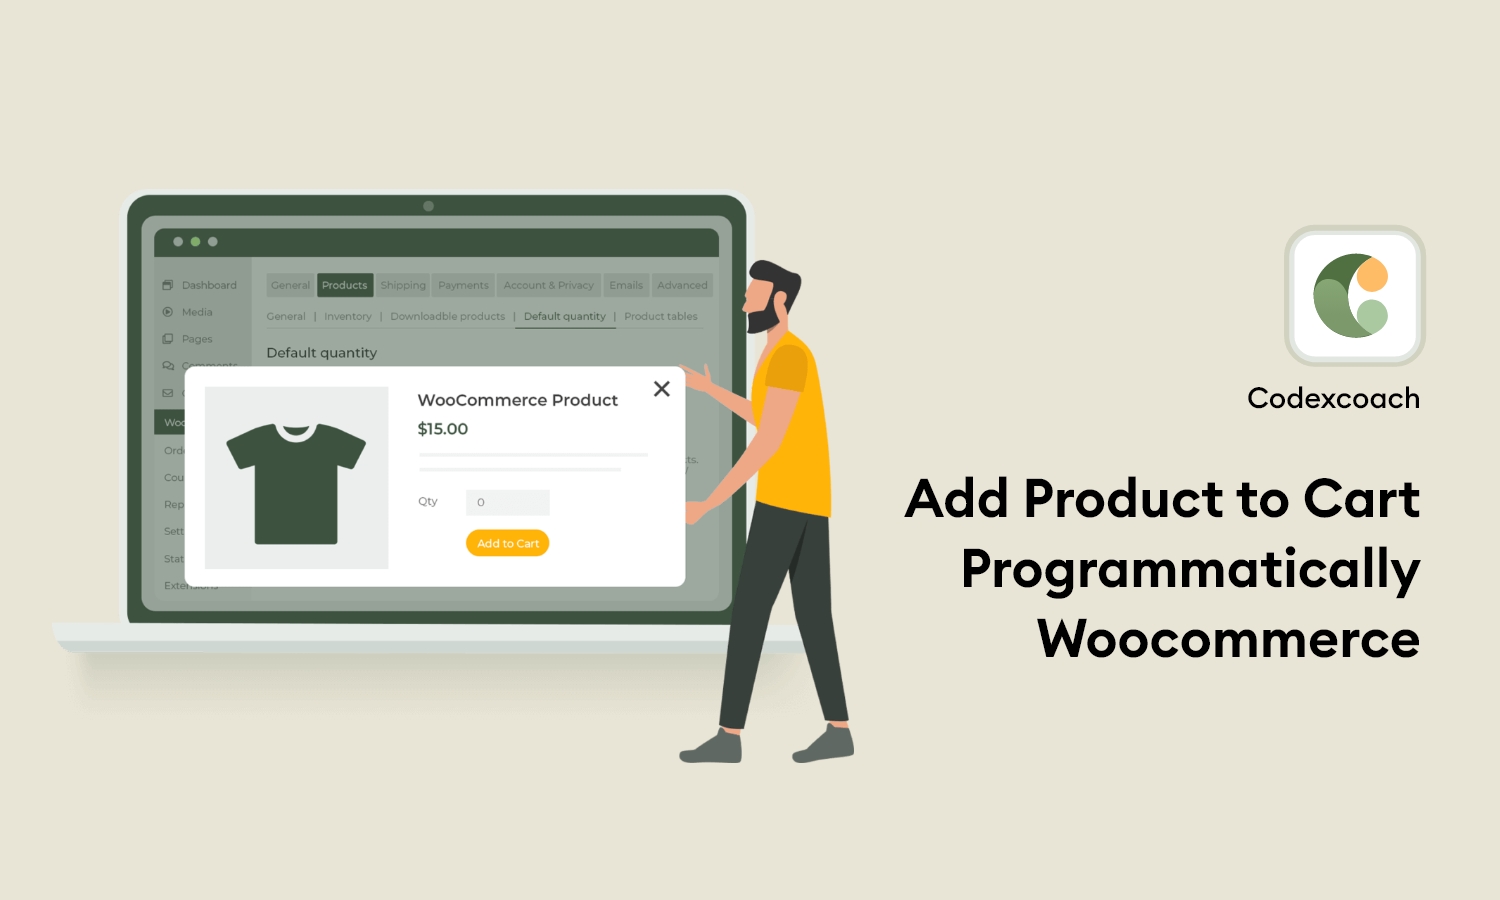 Add Product to Cart Programmatically Woocommerce